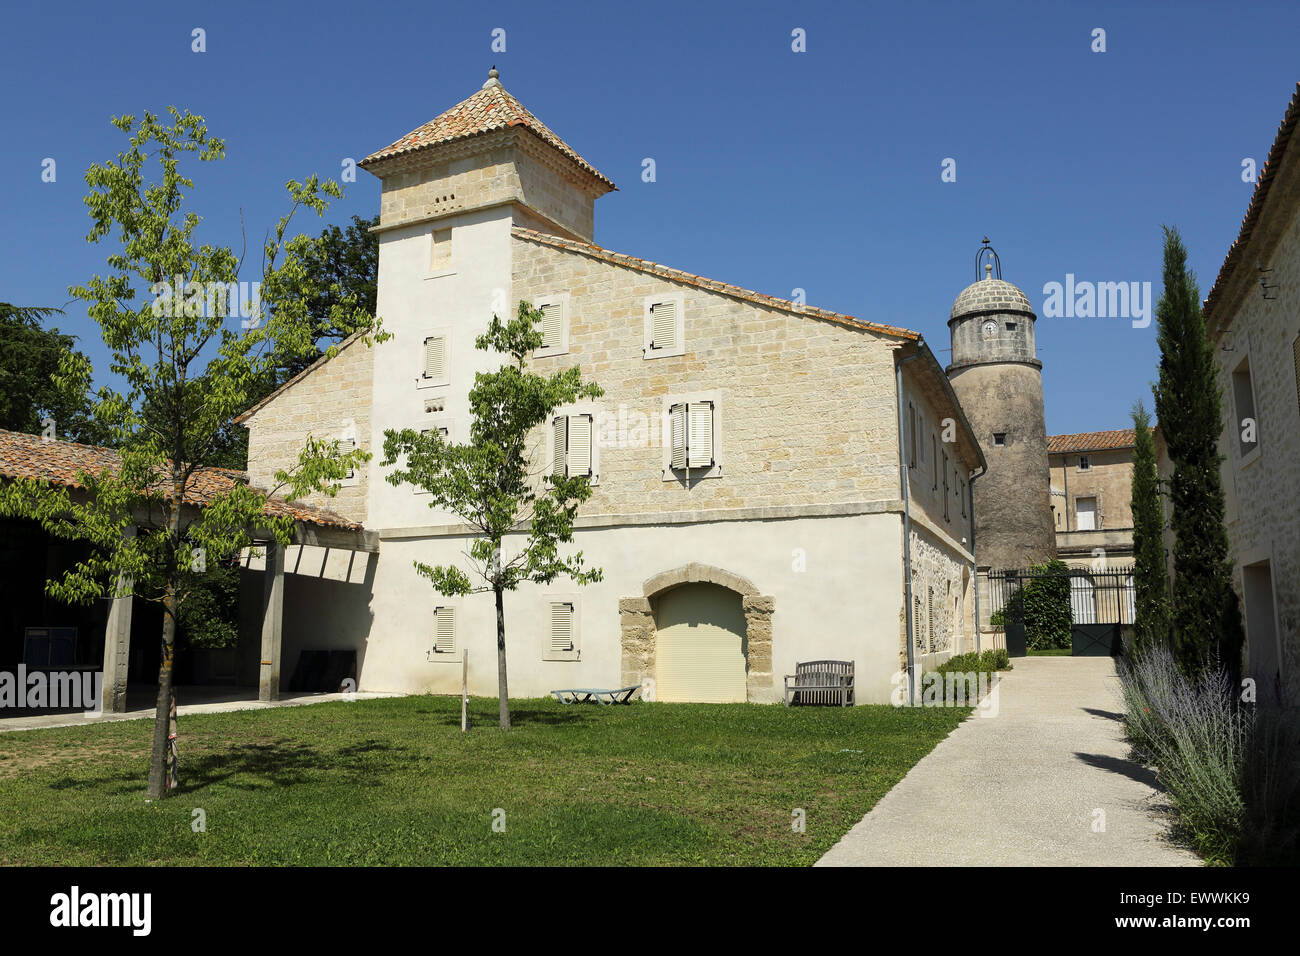 The Domaine de Massereau winery in Sommieres, France. The estate is in Languedoc-Roussillon. Stock Photo